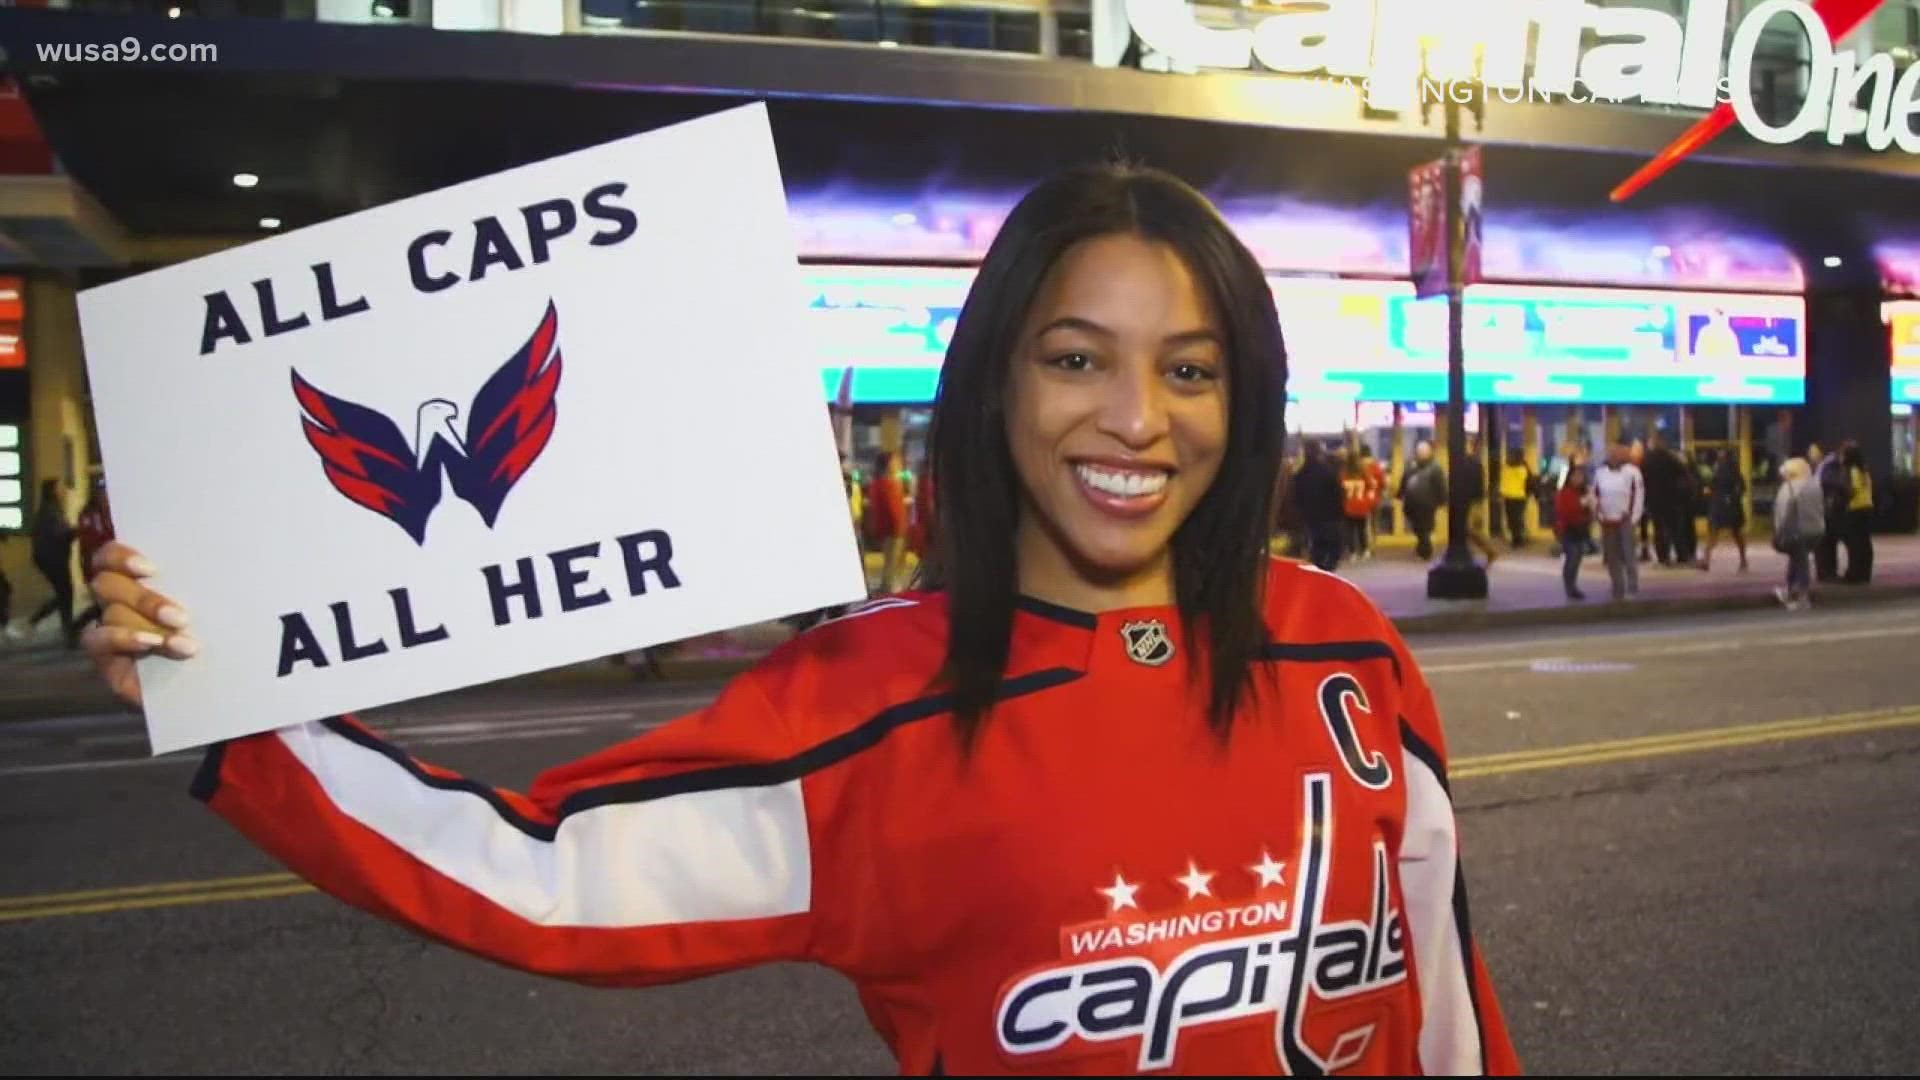 Old iPhone hammer': Caps fan dials up quick assist after hockey